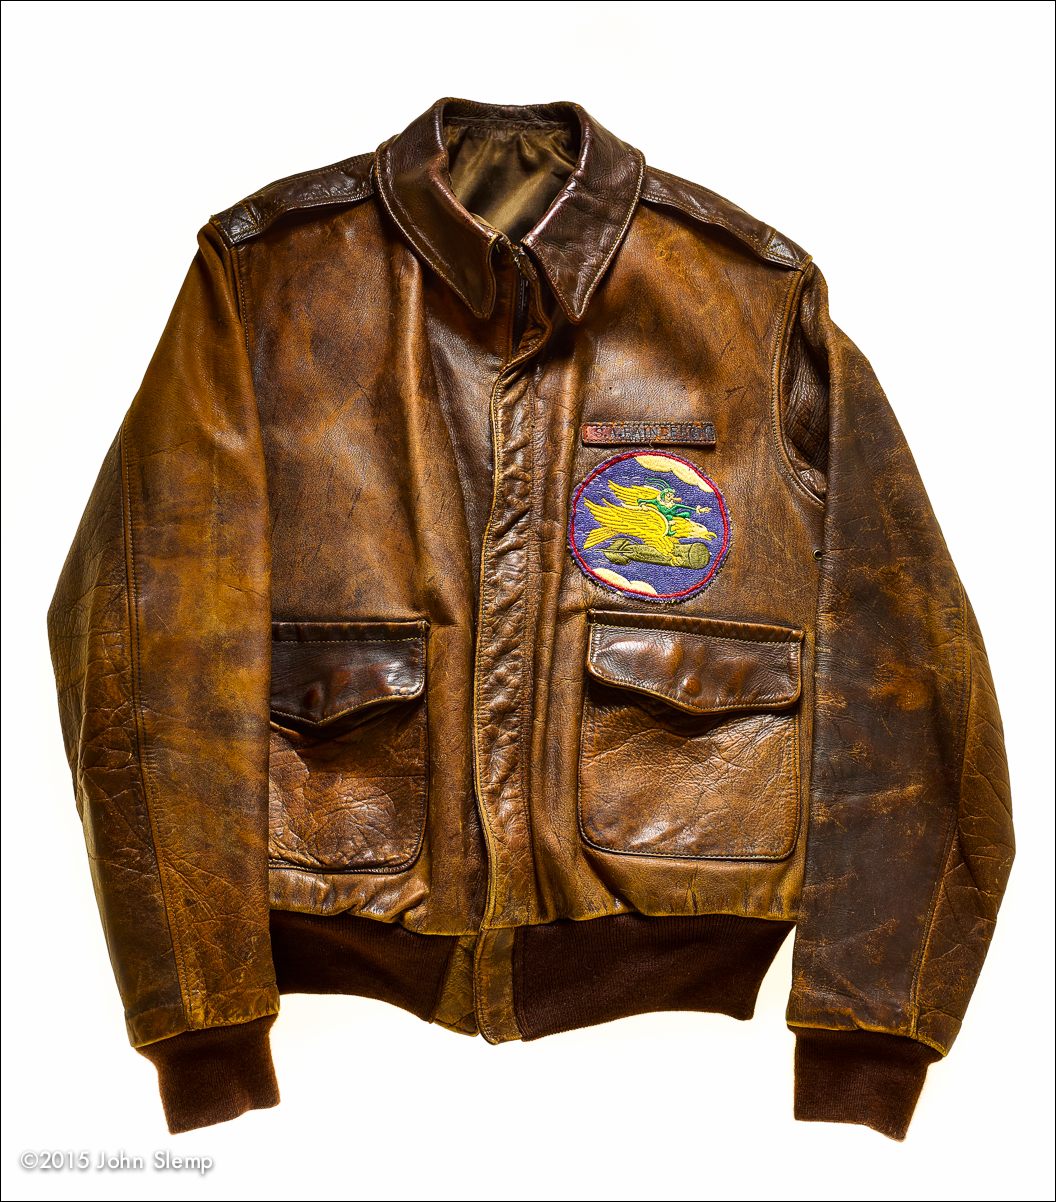 Seymour Fainberg, a B-17 bombardier still lives in California.  His daughter, a local resident, brought the still buttery soft jacket to John after she returned from a visit home.